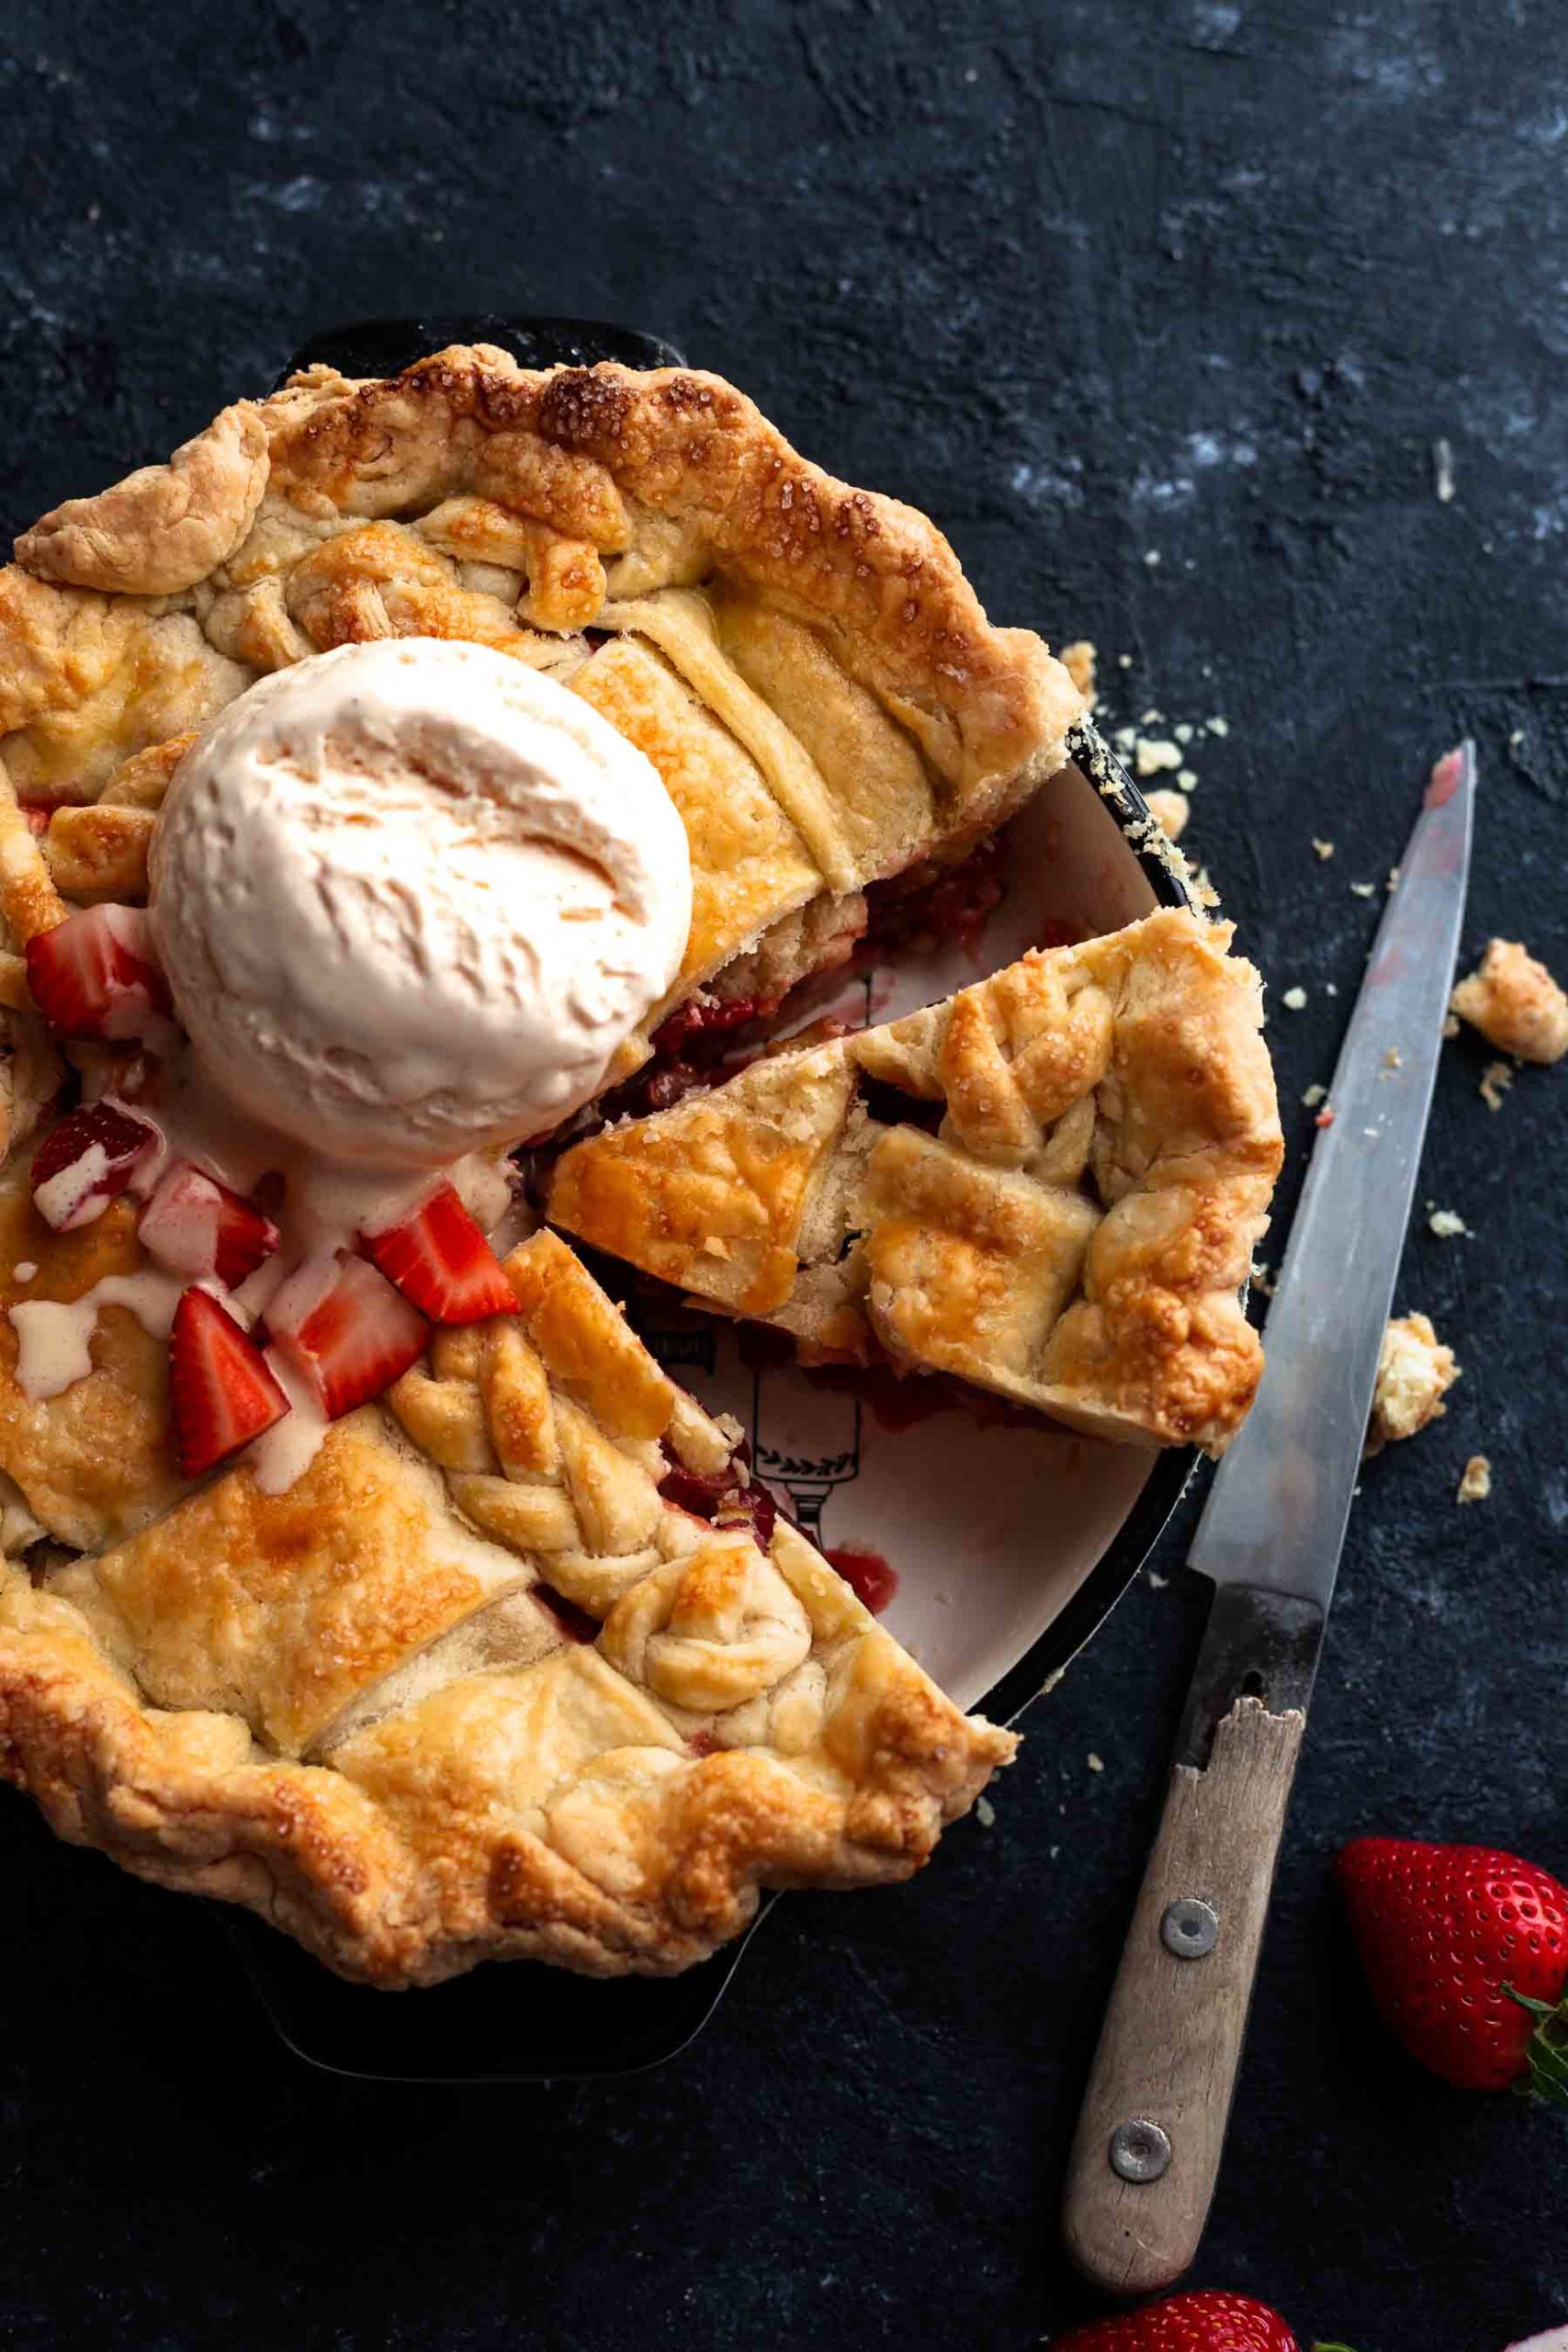 a sliced strawberry rhubarb pie in a baking dish with ice cream dollop on it and a knife next to it